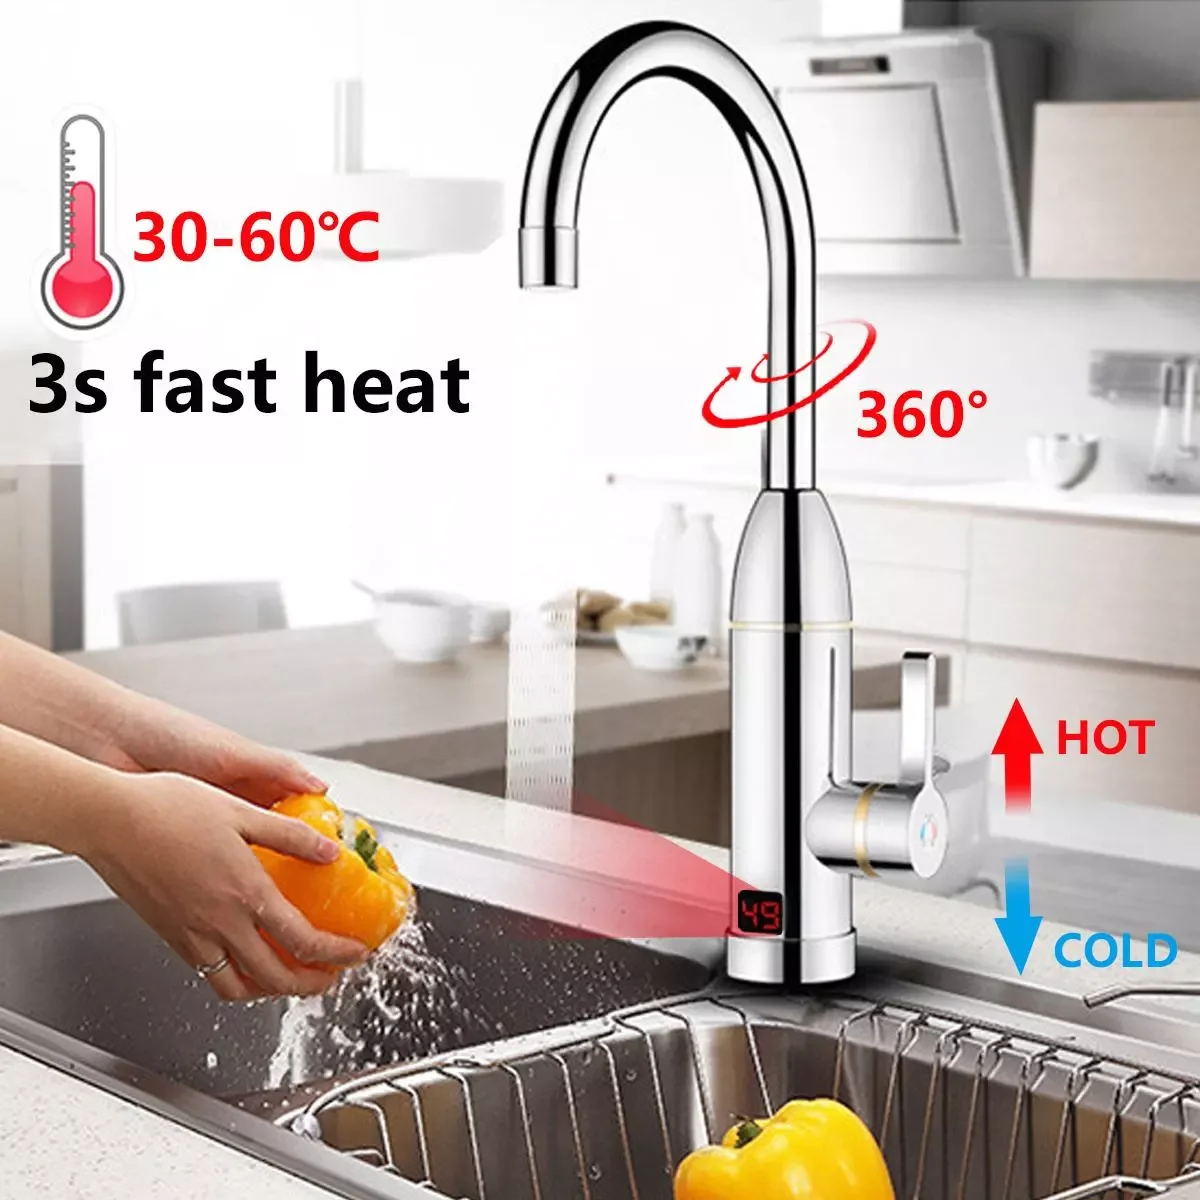 220V 3000W Kitchen Instant Heating Faucet Heater Hot Cold Dual-Use Tankless Water Quickly Heating Tap Shower with LED Display enlarge